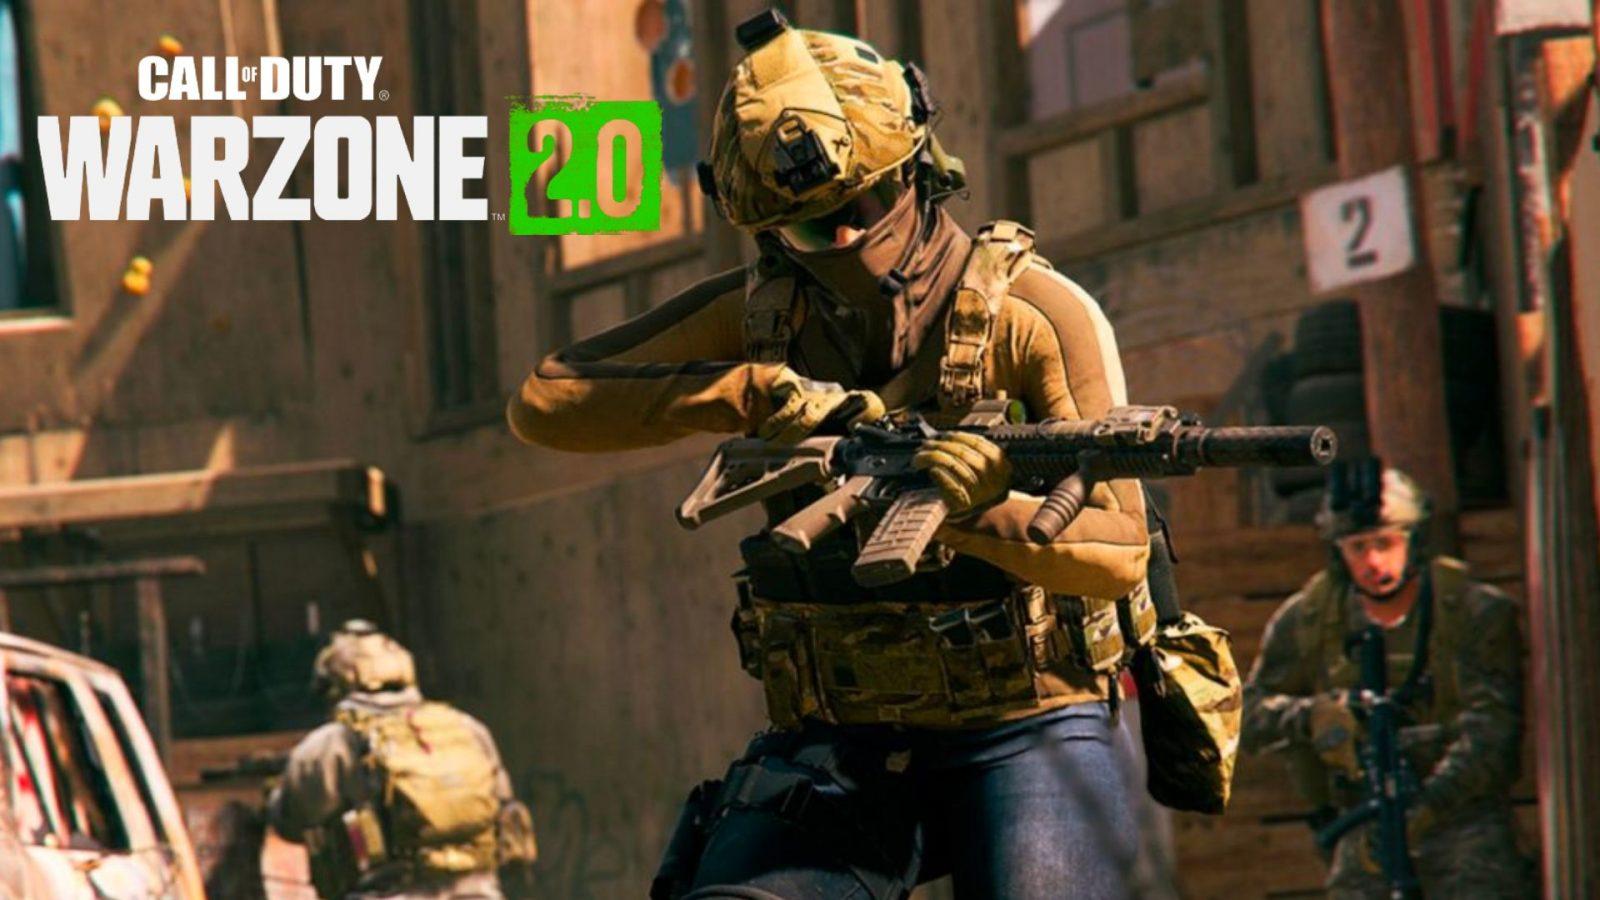 Are you ready for COD: Warzone 2.0?